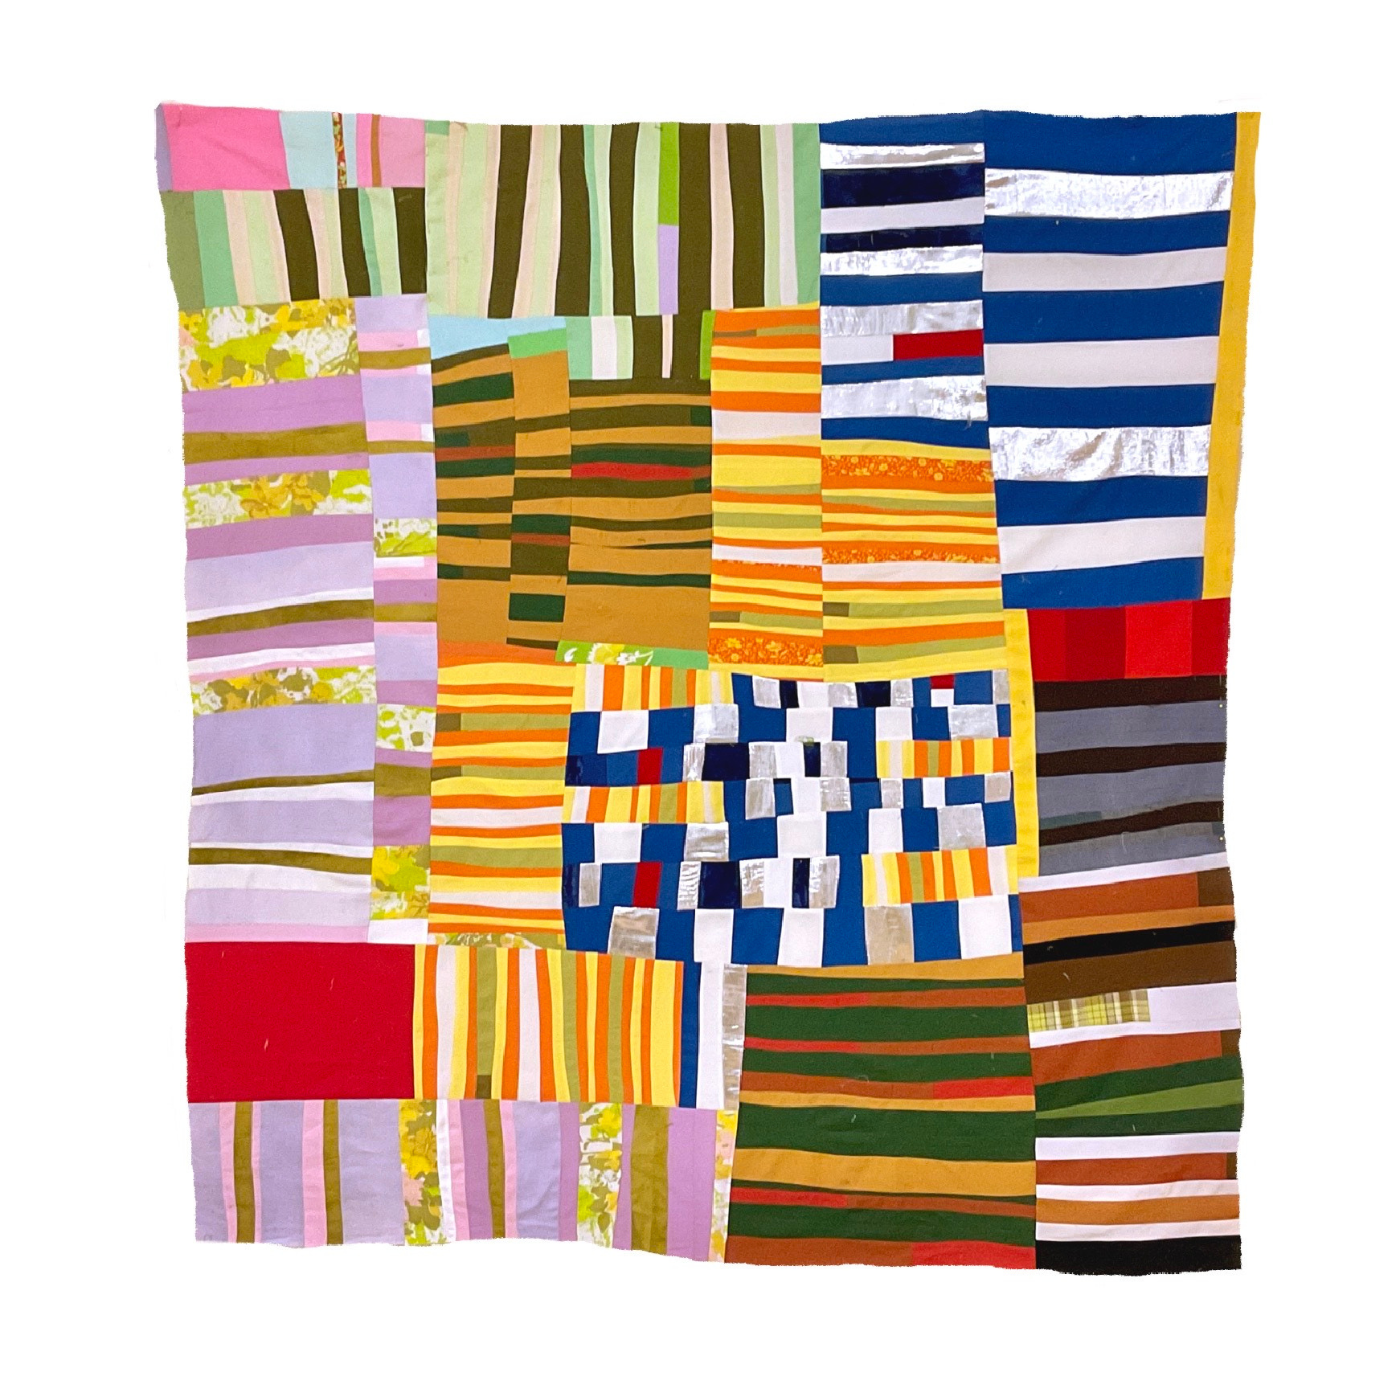 A quilt comprised of many small striped blocks, turned both horizontally and vertically. Small strips of green, yellow, white, blue, black, red and white have been combined together to form a quilt of many colors, based on the colors in Sherri’s childhood home.